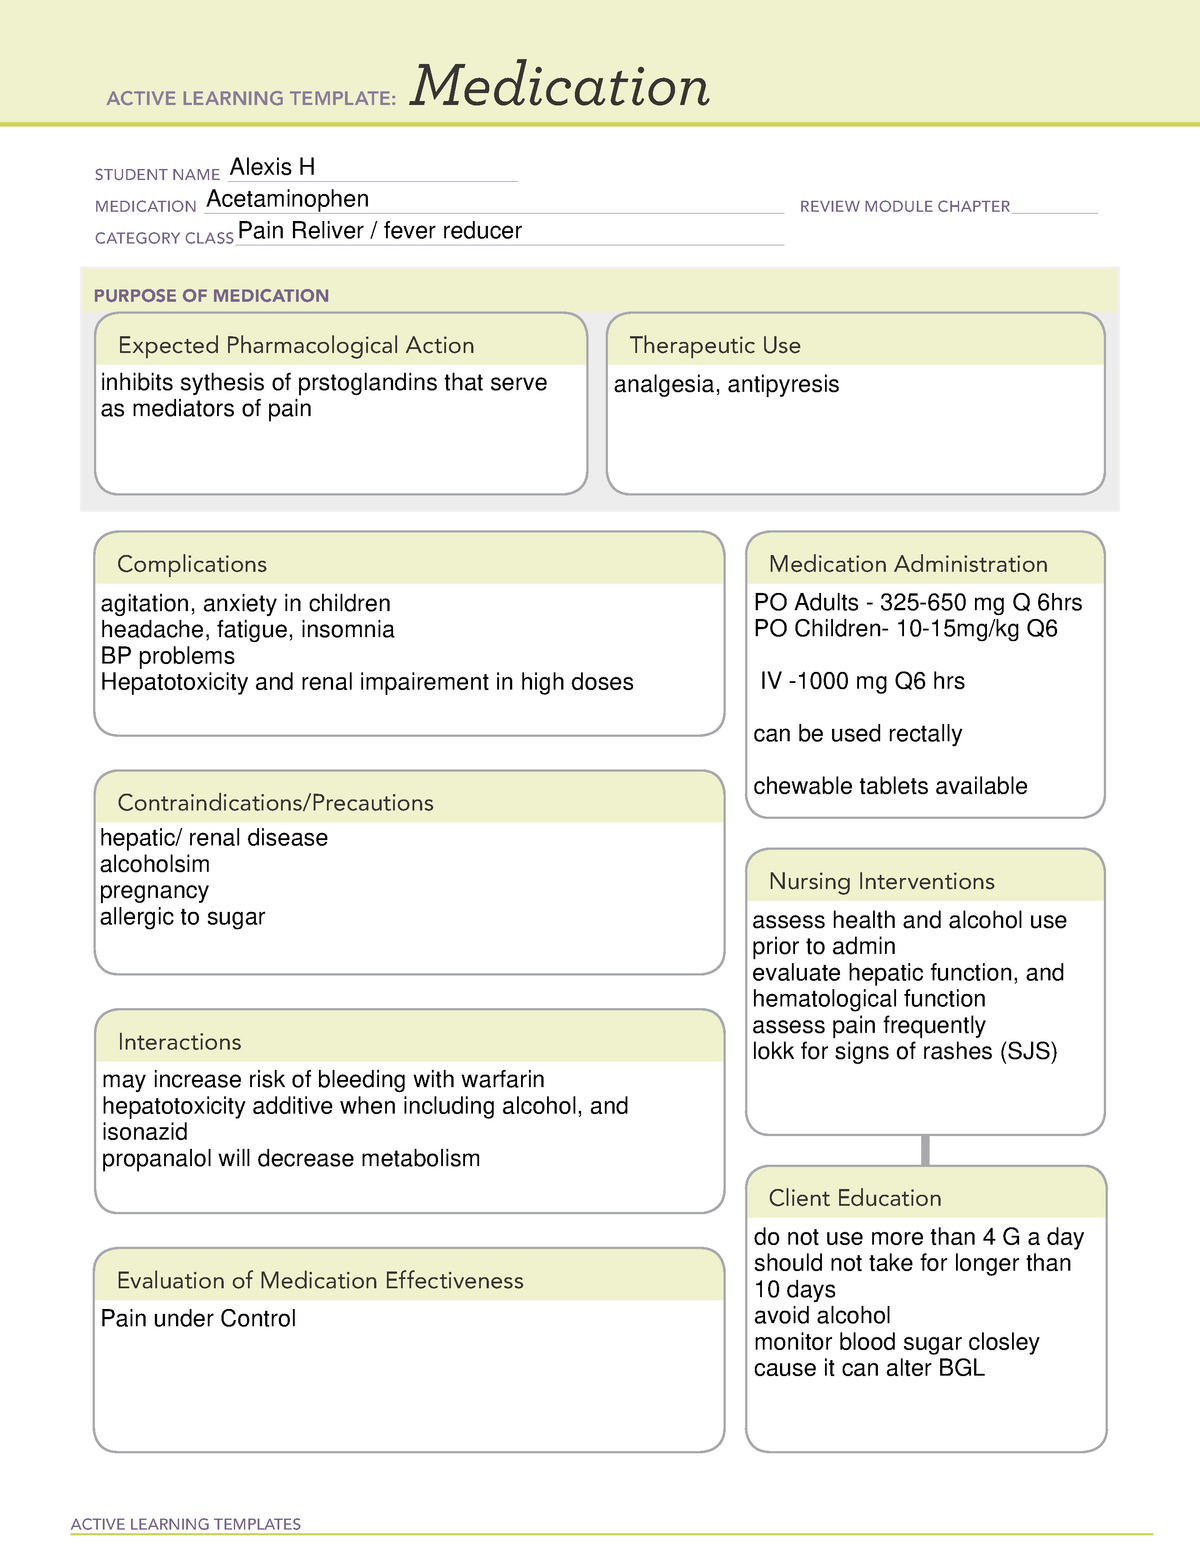 Acetaminophen med sheet Active Learning Template ATI ACTIVE LEARNING